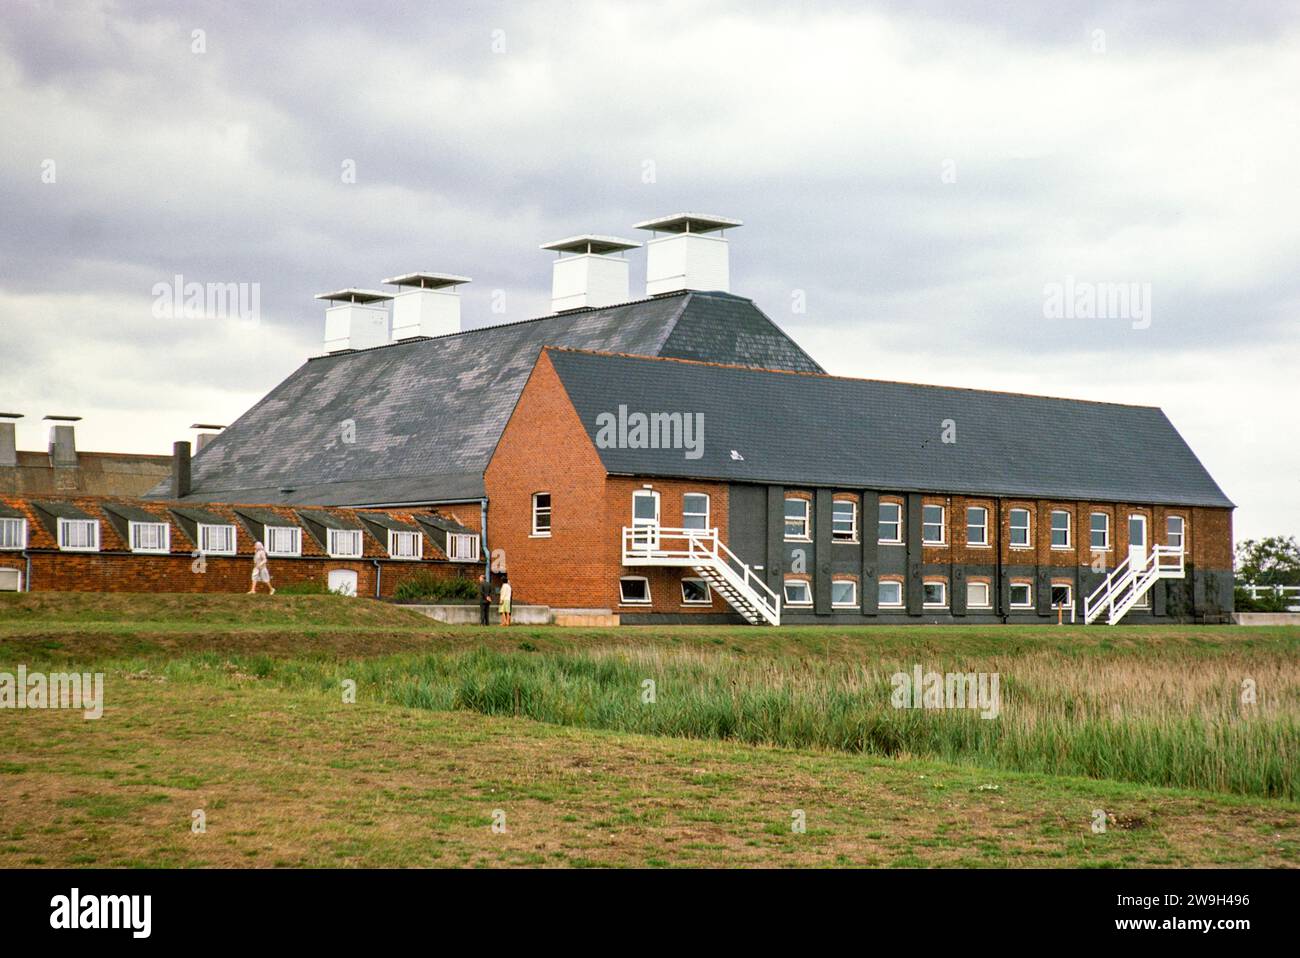 Concert hall in converted industrial building, Snape Maltings, Snape, Suffolk, England, UK July 1976 Stock Photo